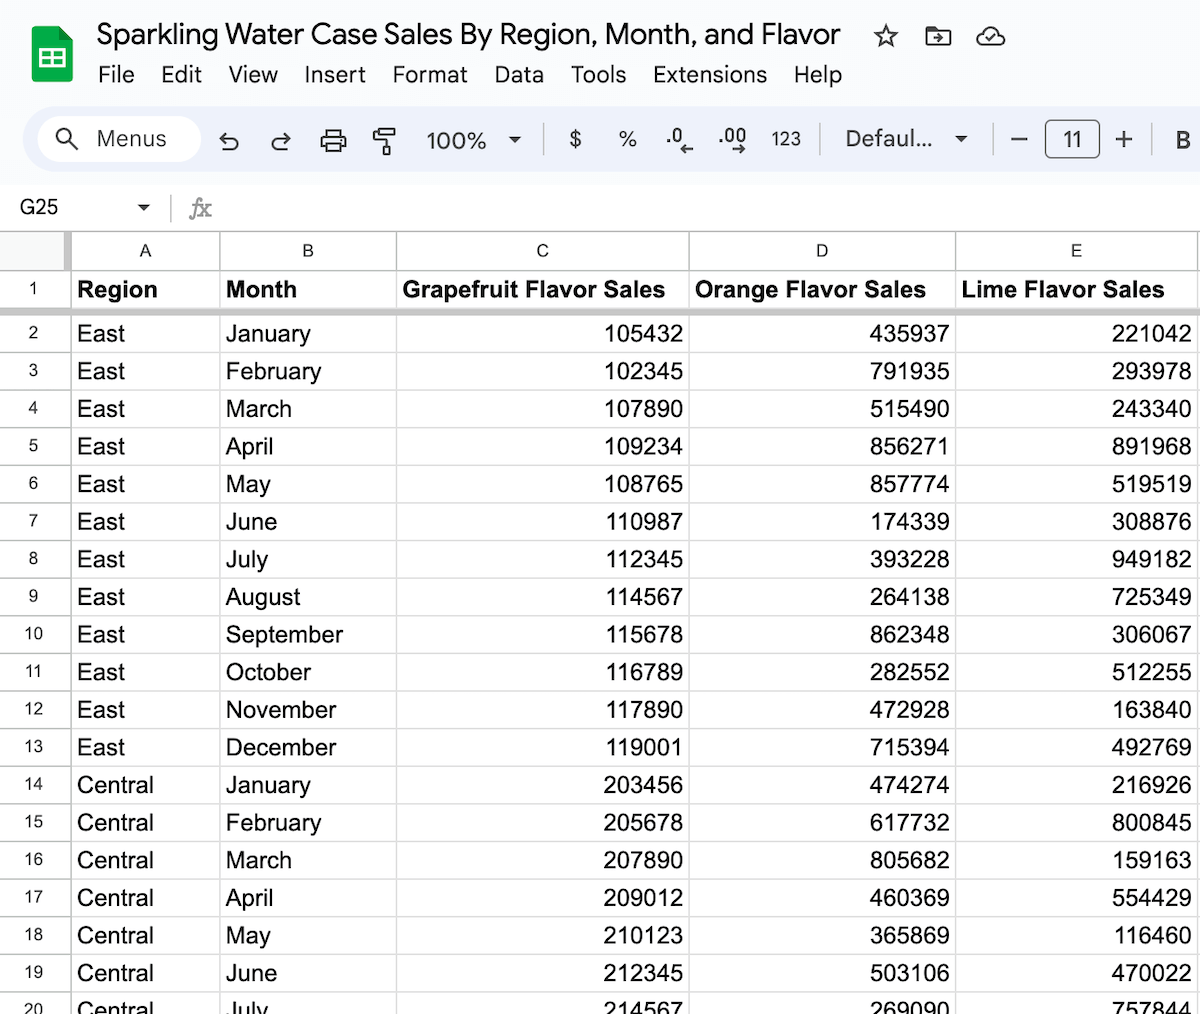 Sparkling Water Sales in Google Sheets